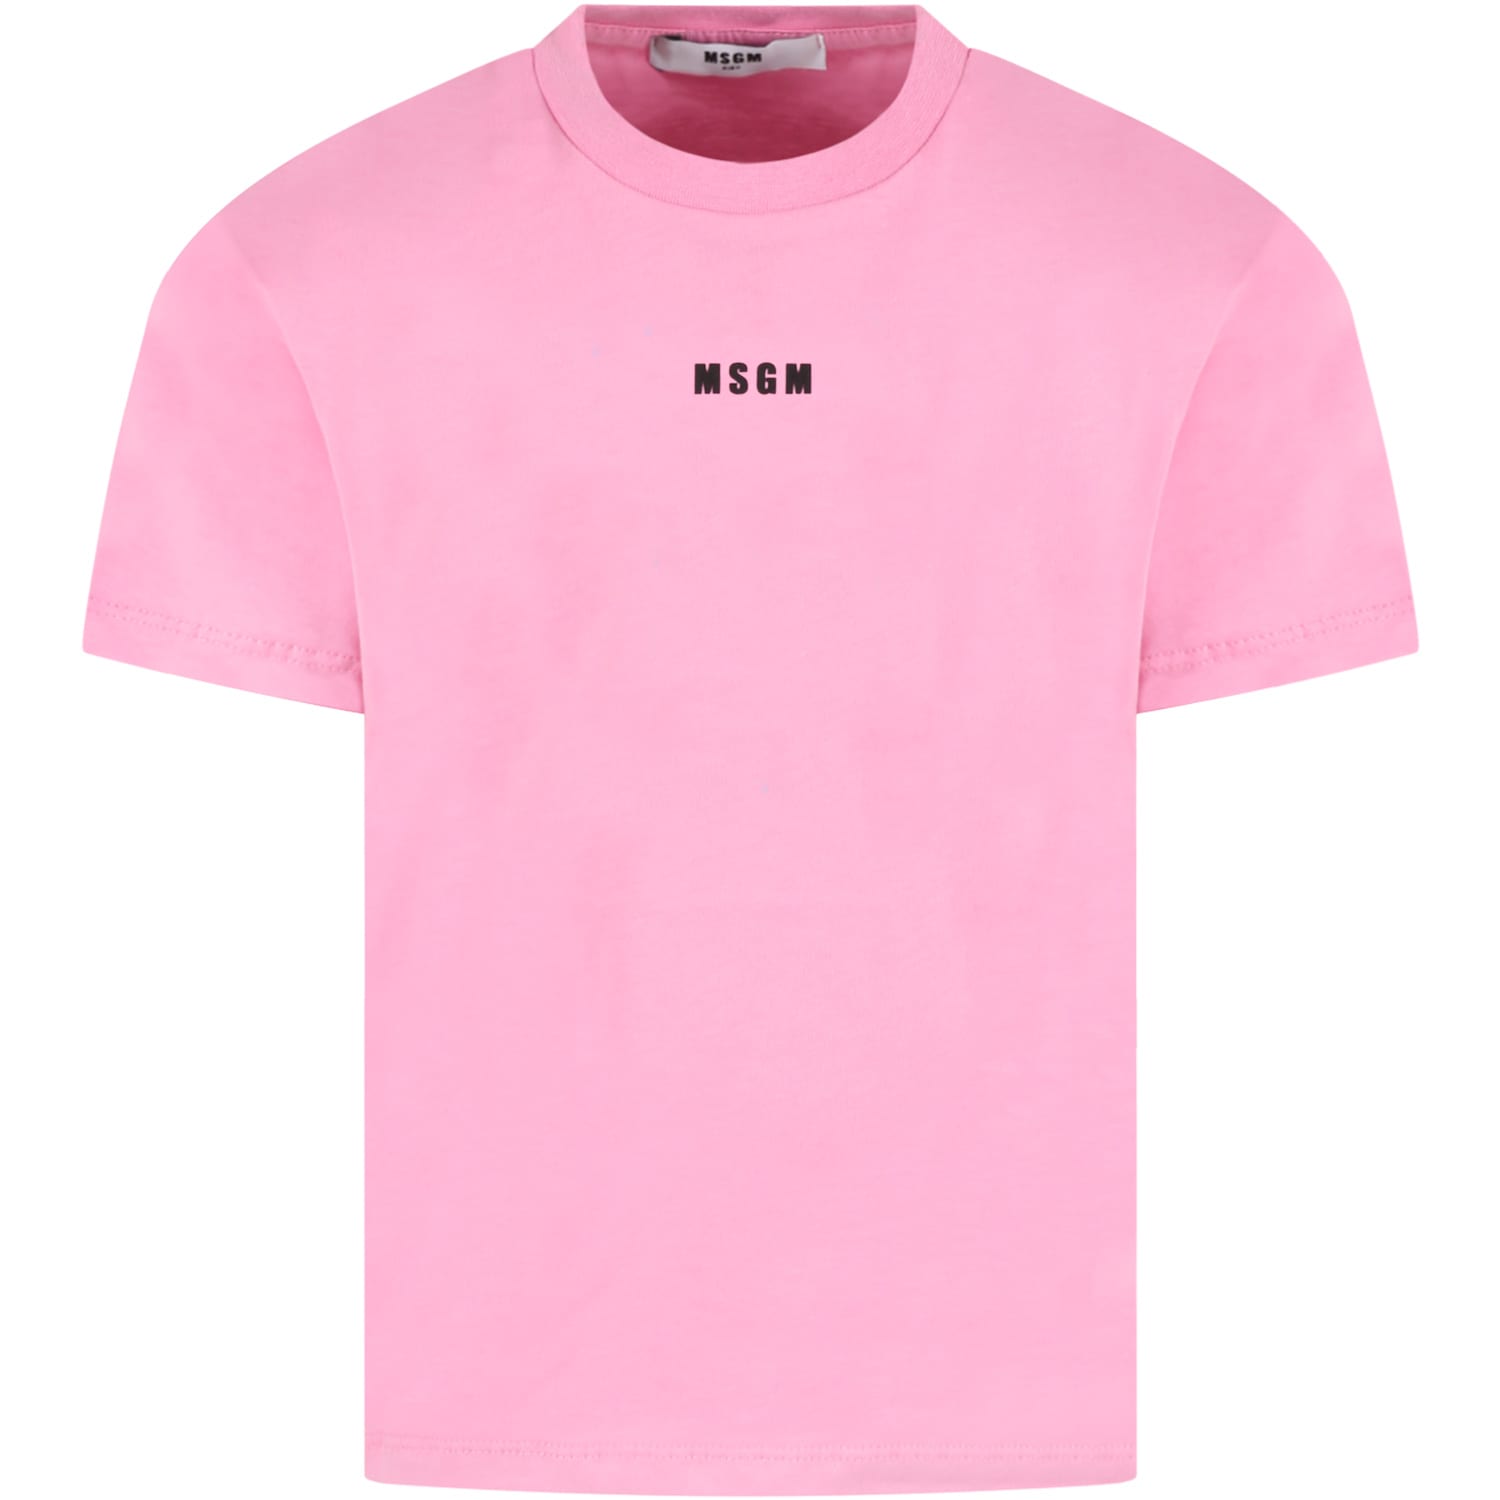 MSGM Pink T-shirt For Girl With Black Logo